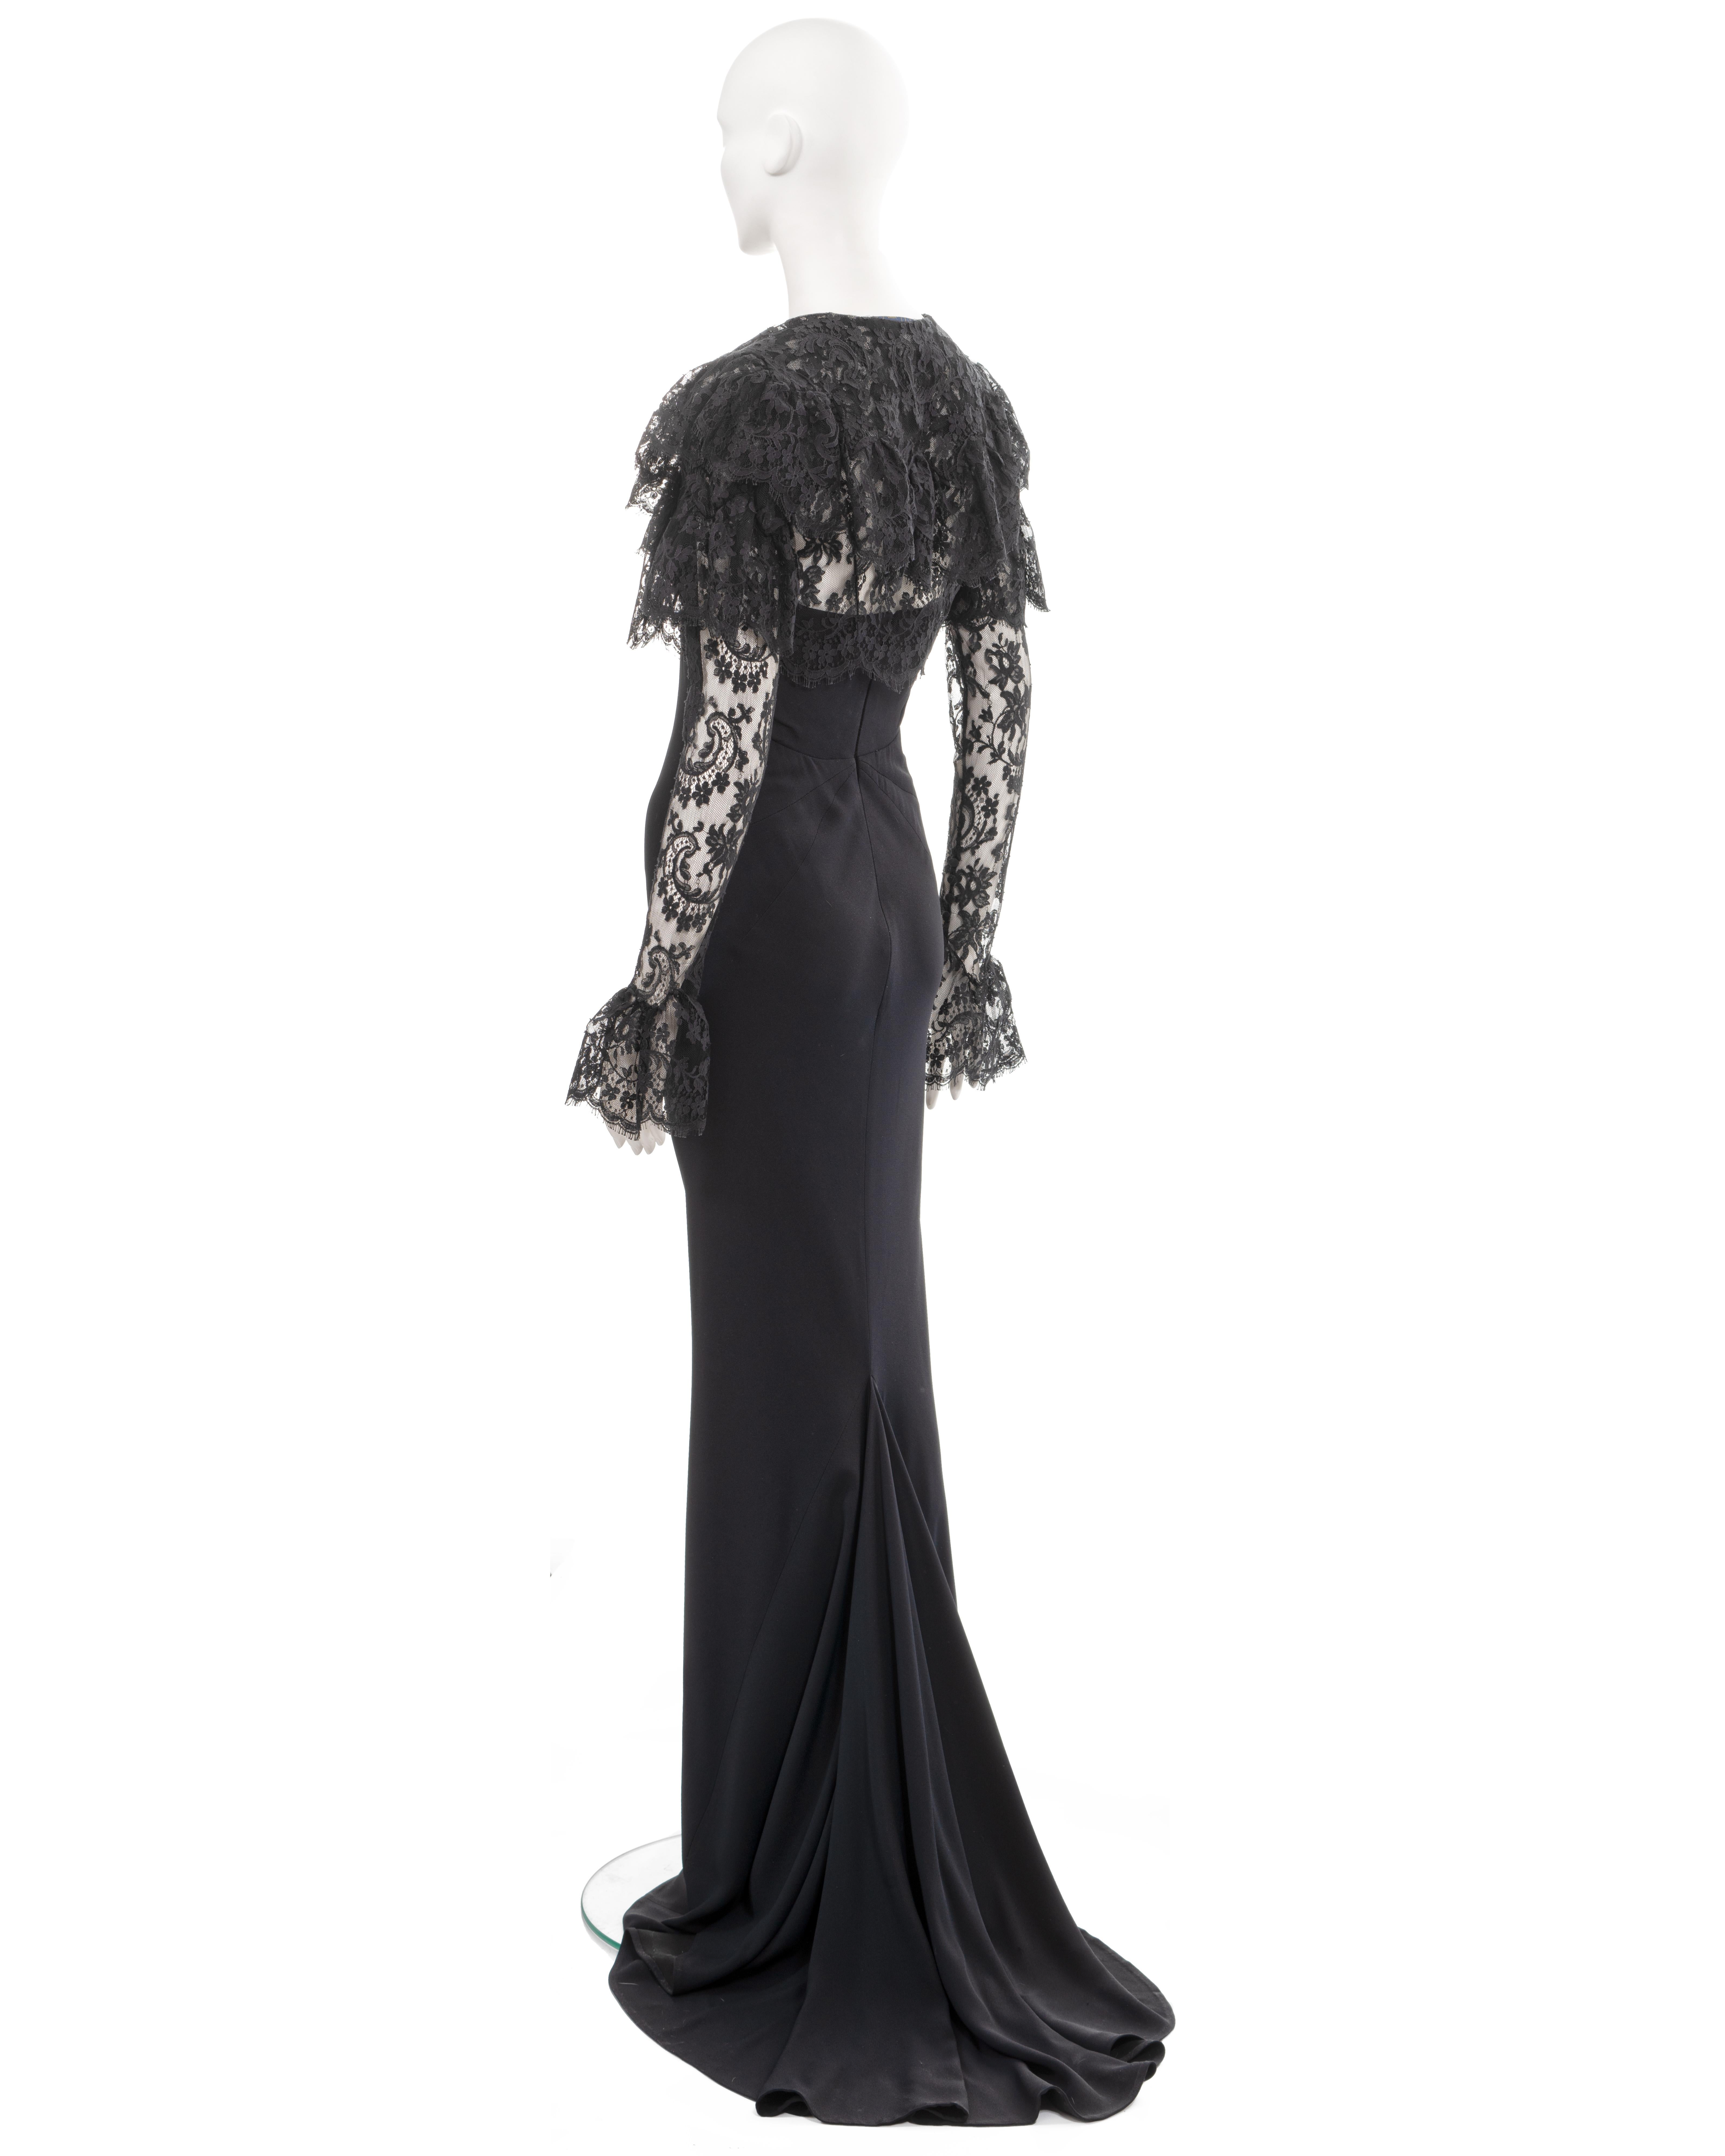 Givenchy by John Galliano black strapless evening dress and lace bolero, ss 1997 For Sale 11